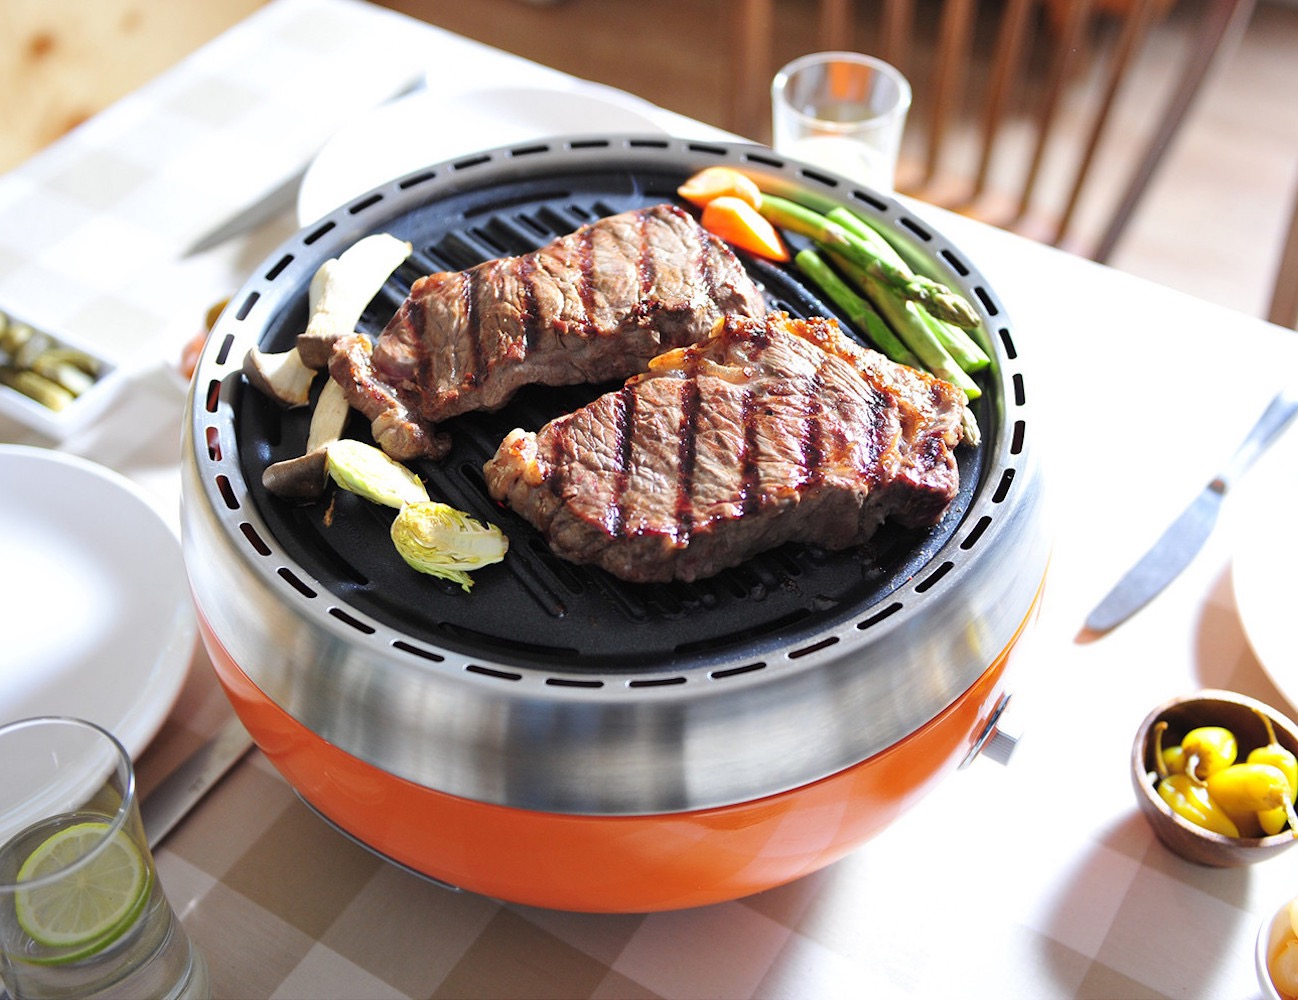 Homping Grill – Ultimate Portable Charcoal BBQ Grill